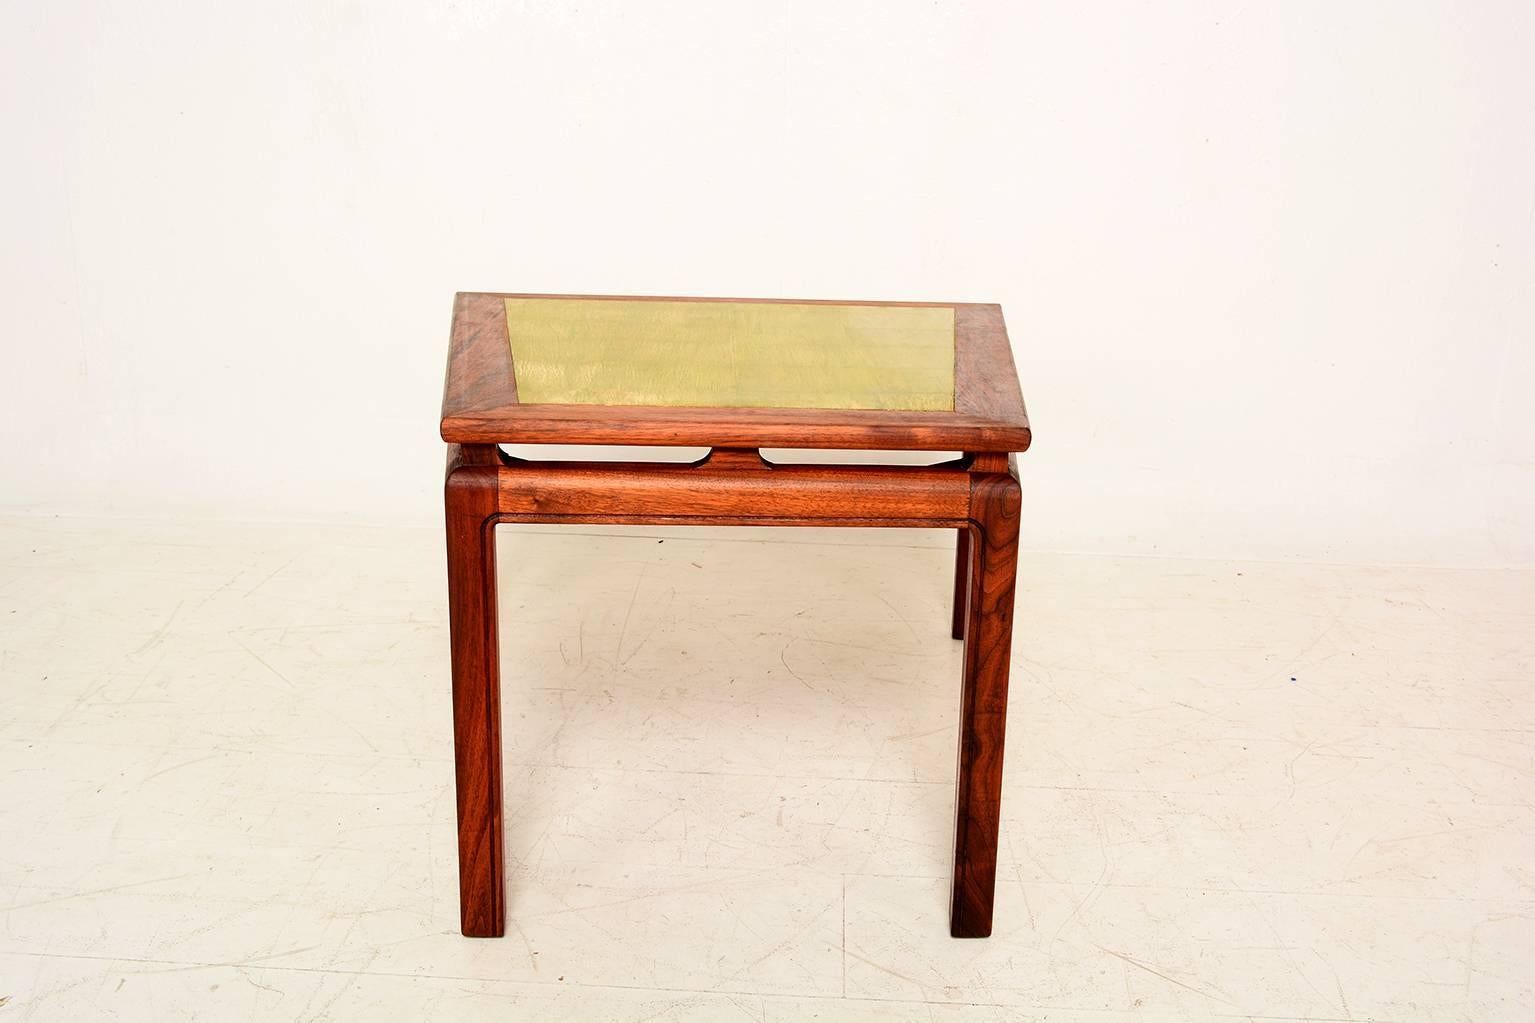 For your consideration a beautiful Mid-Century table constructed with walnut wood and gold leaf top.

Table construction is very good. No label present from the maker.